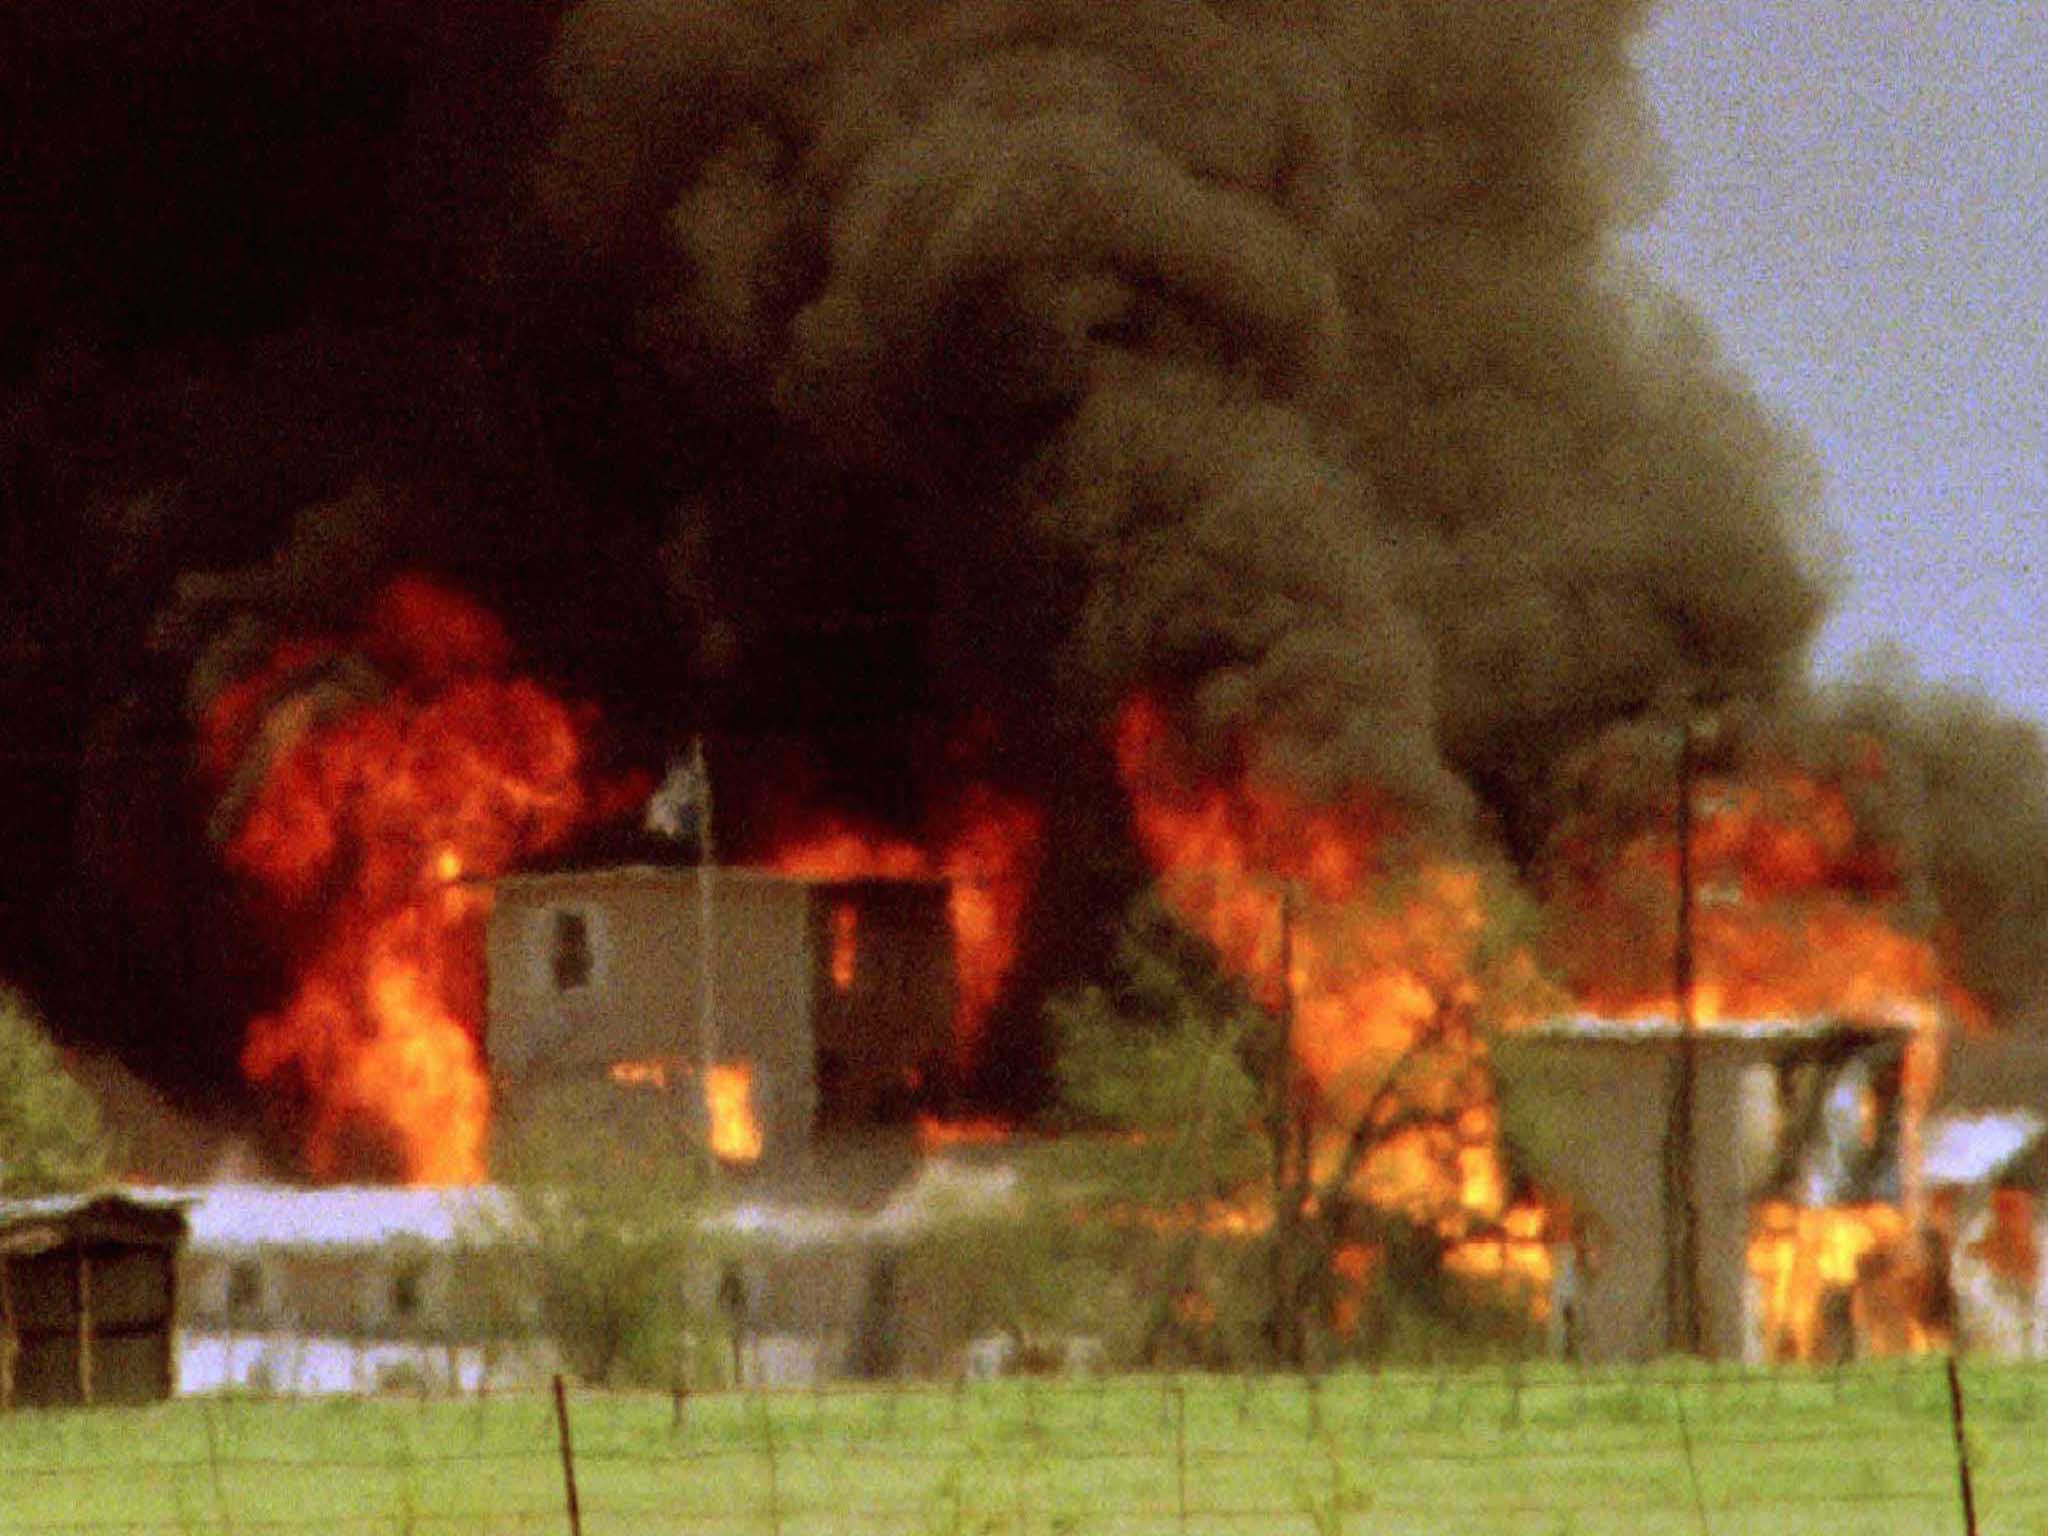 Waco How A 51 Day Standoff Between A Christian Cult And The Fbi